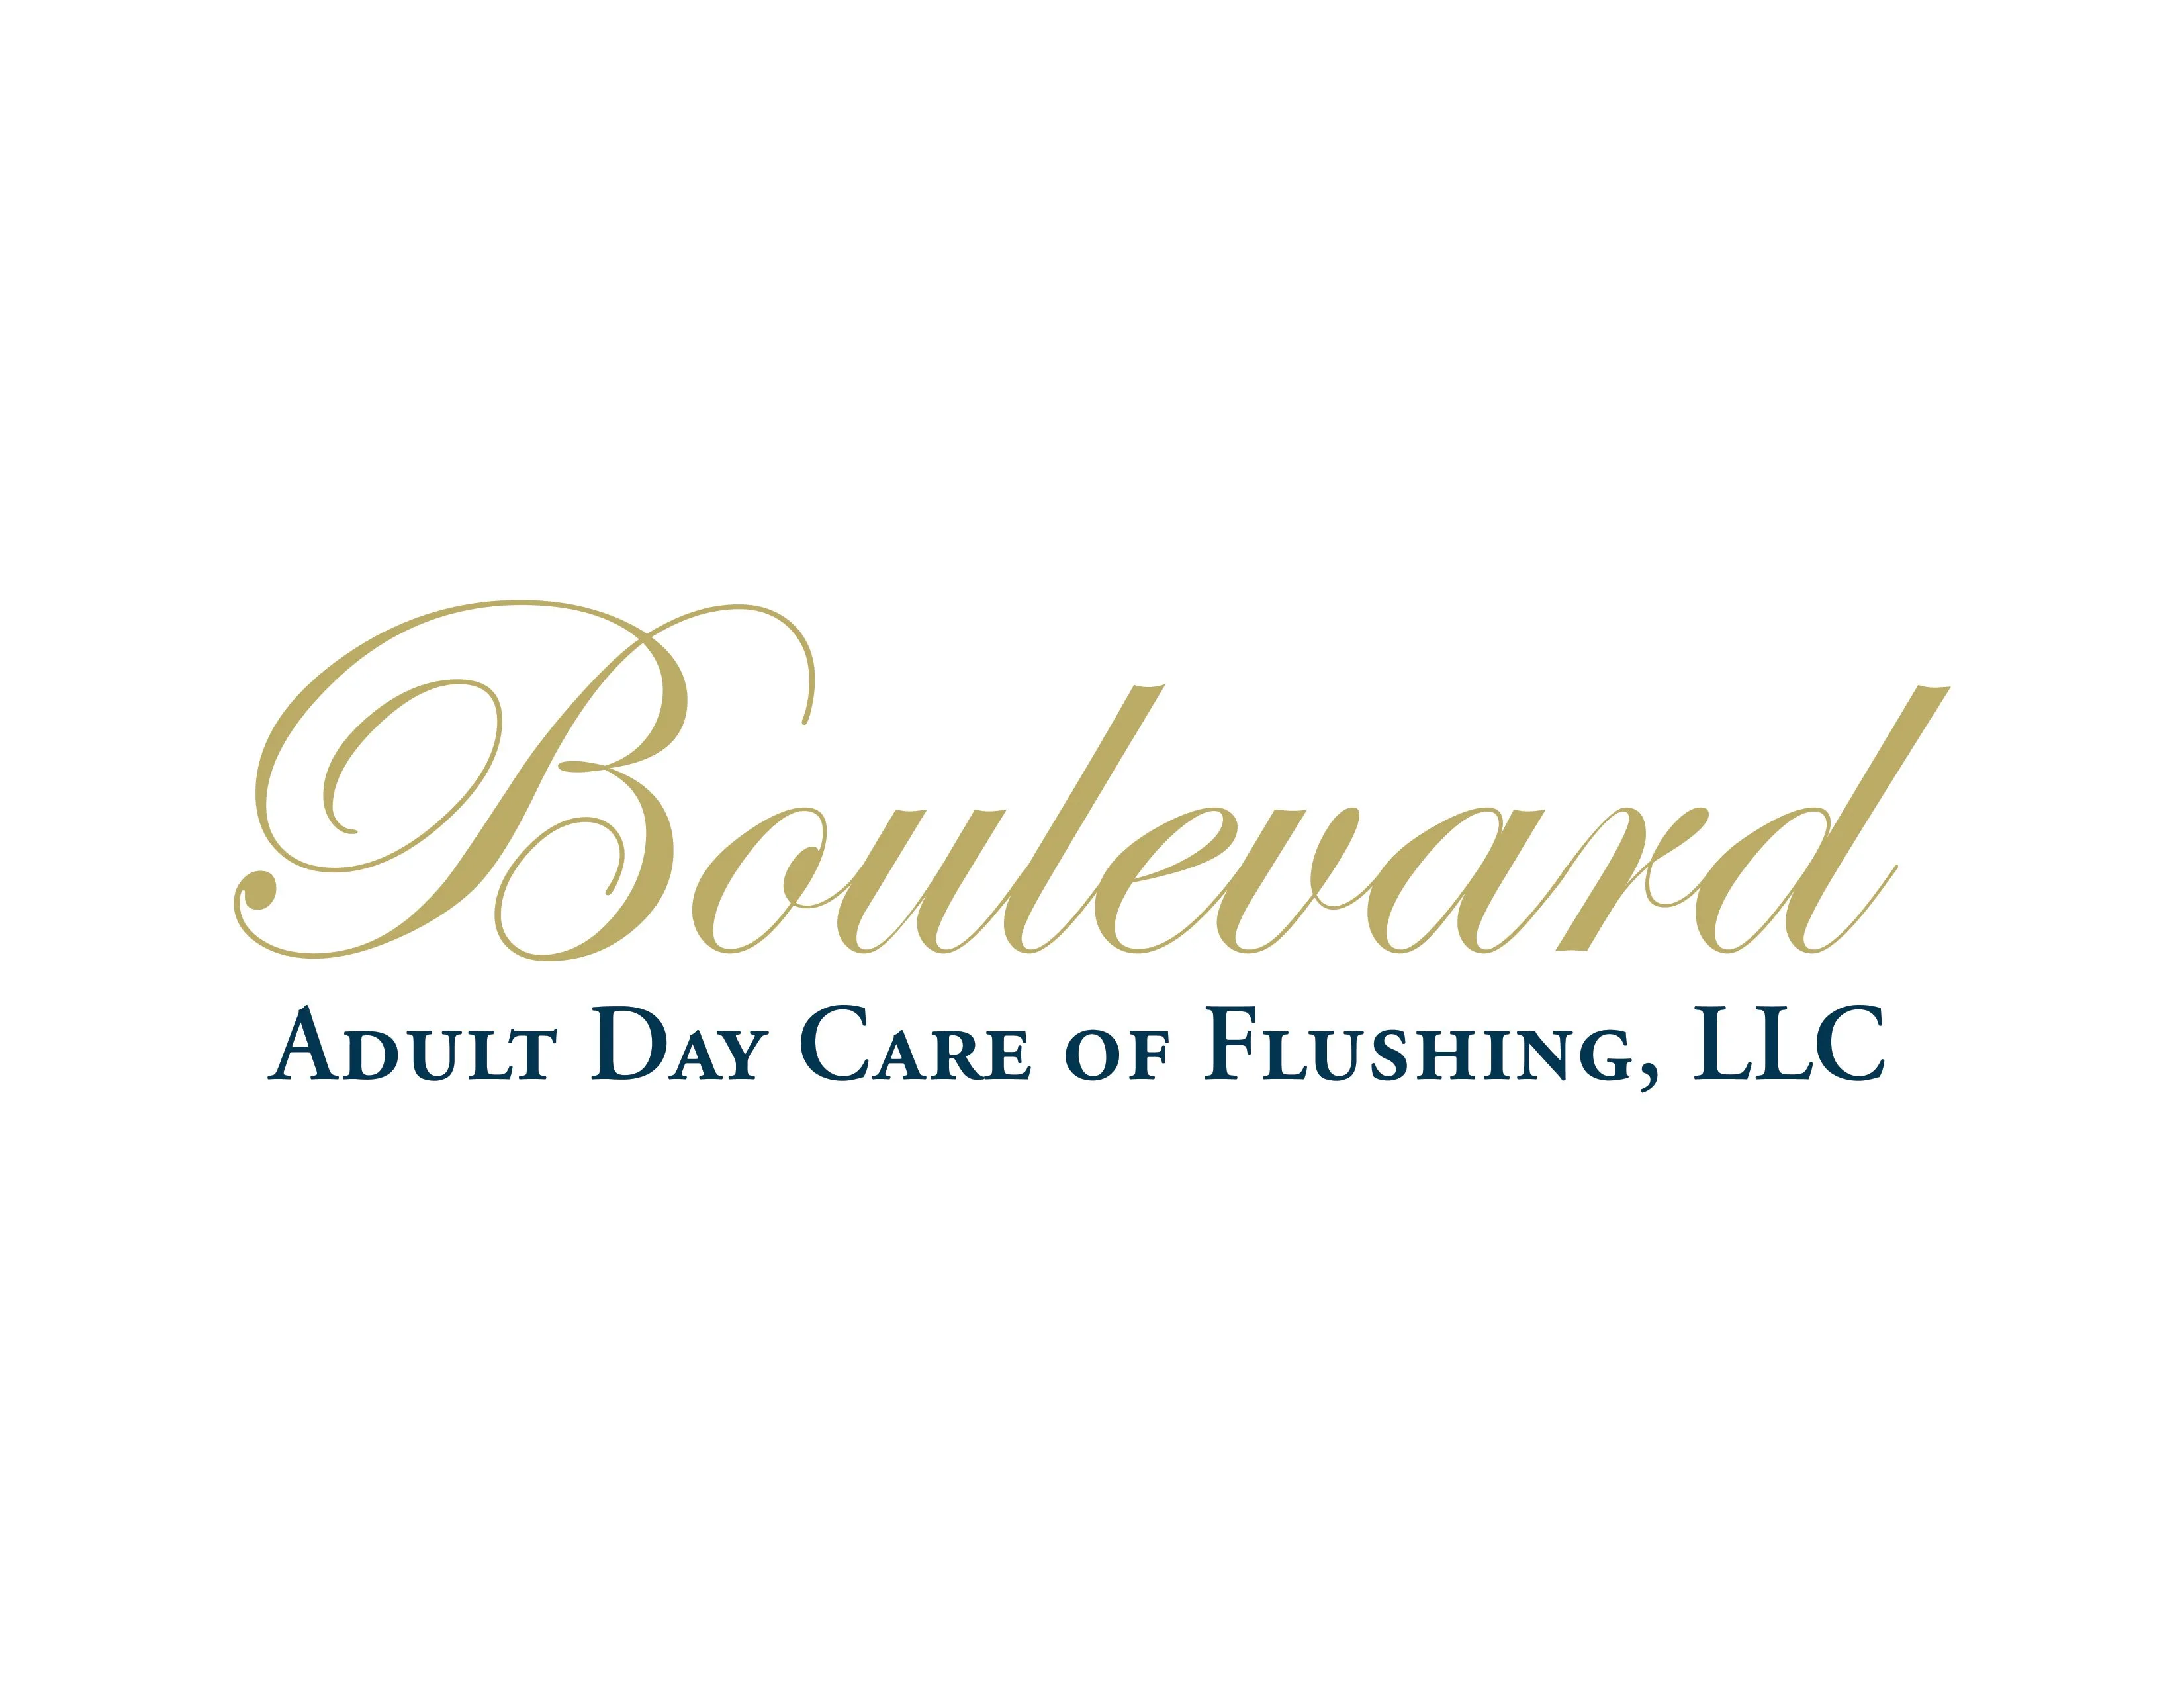 the logo for the healthcare company Bouleard Adult Day Care